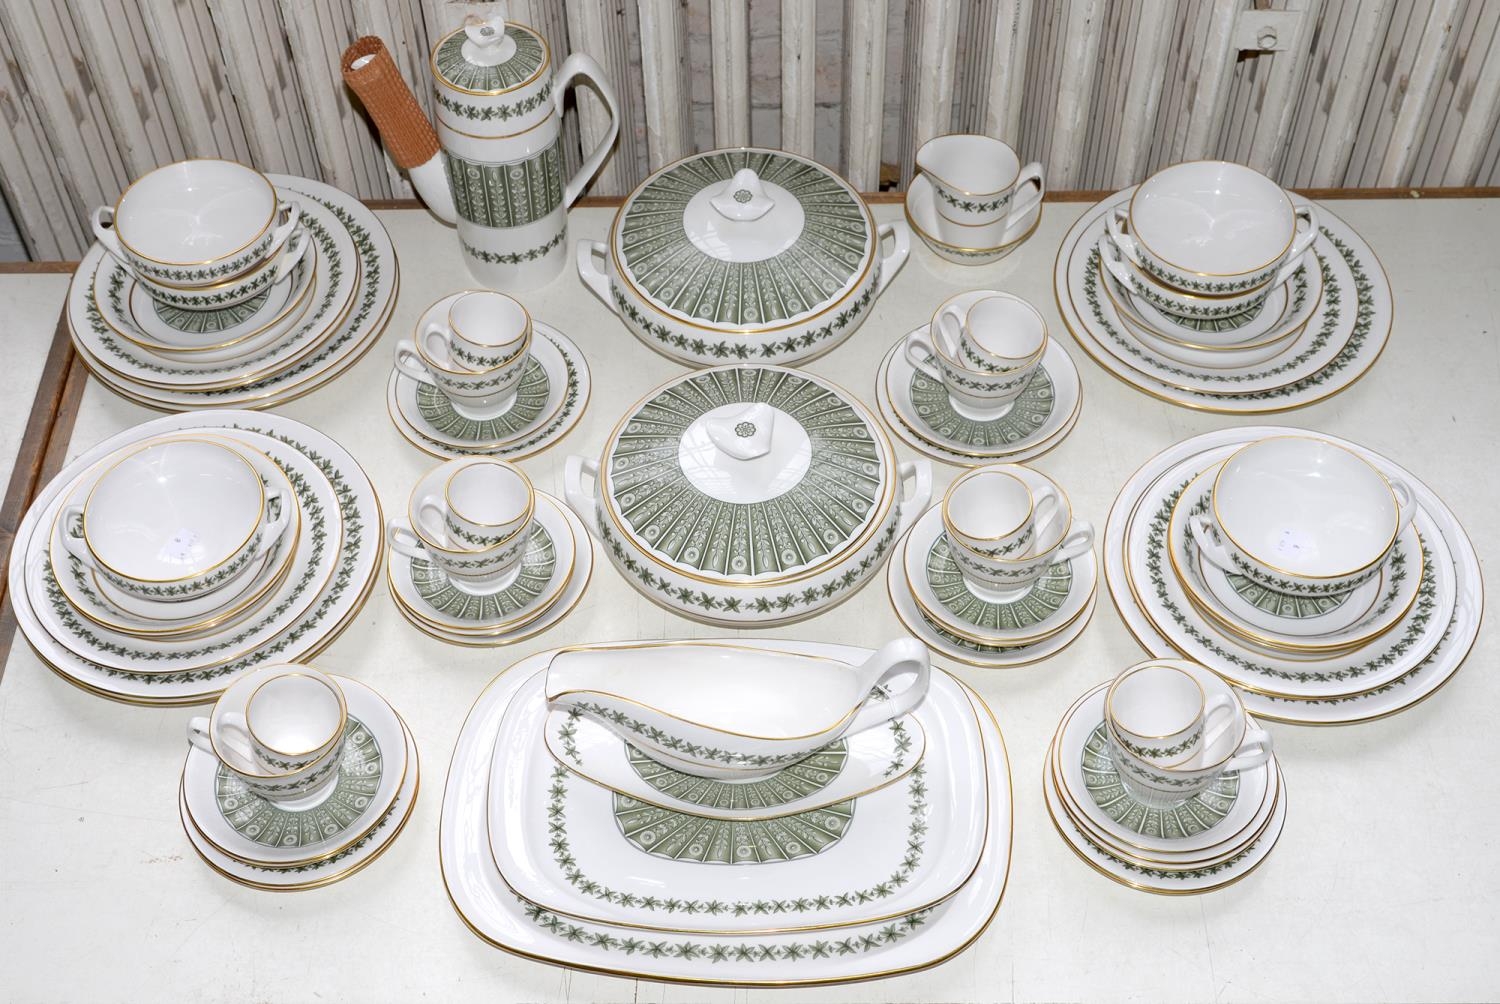 A Spode bone china Provenance pattern dinner service, printed mark Good condition. Please note not